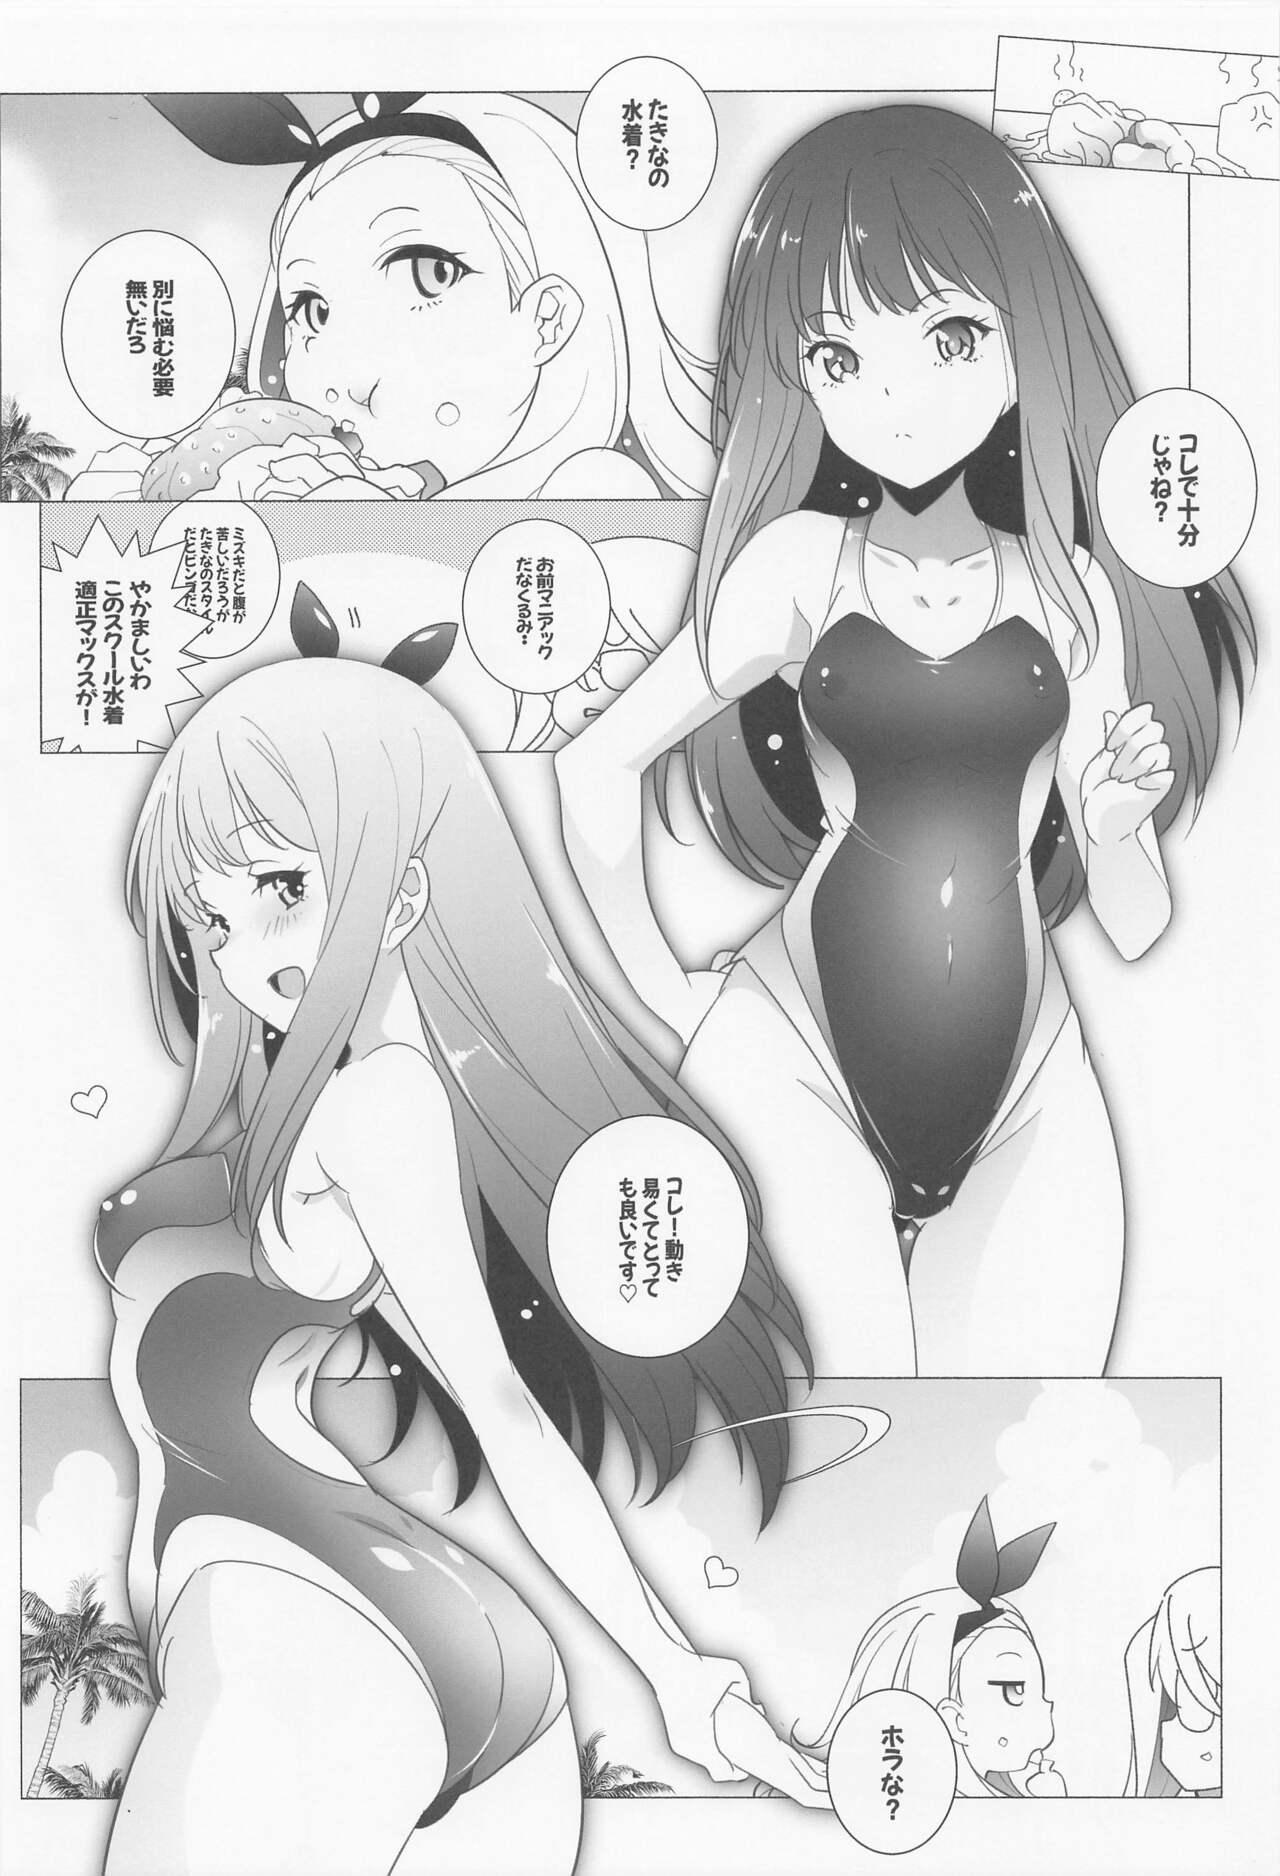 Man INTER MISSION - Lycoris recoil Girl - Page 5